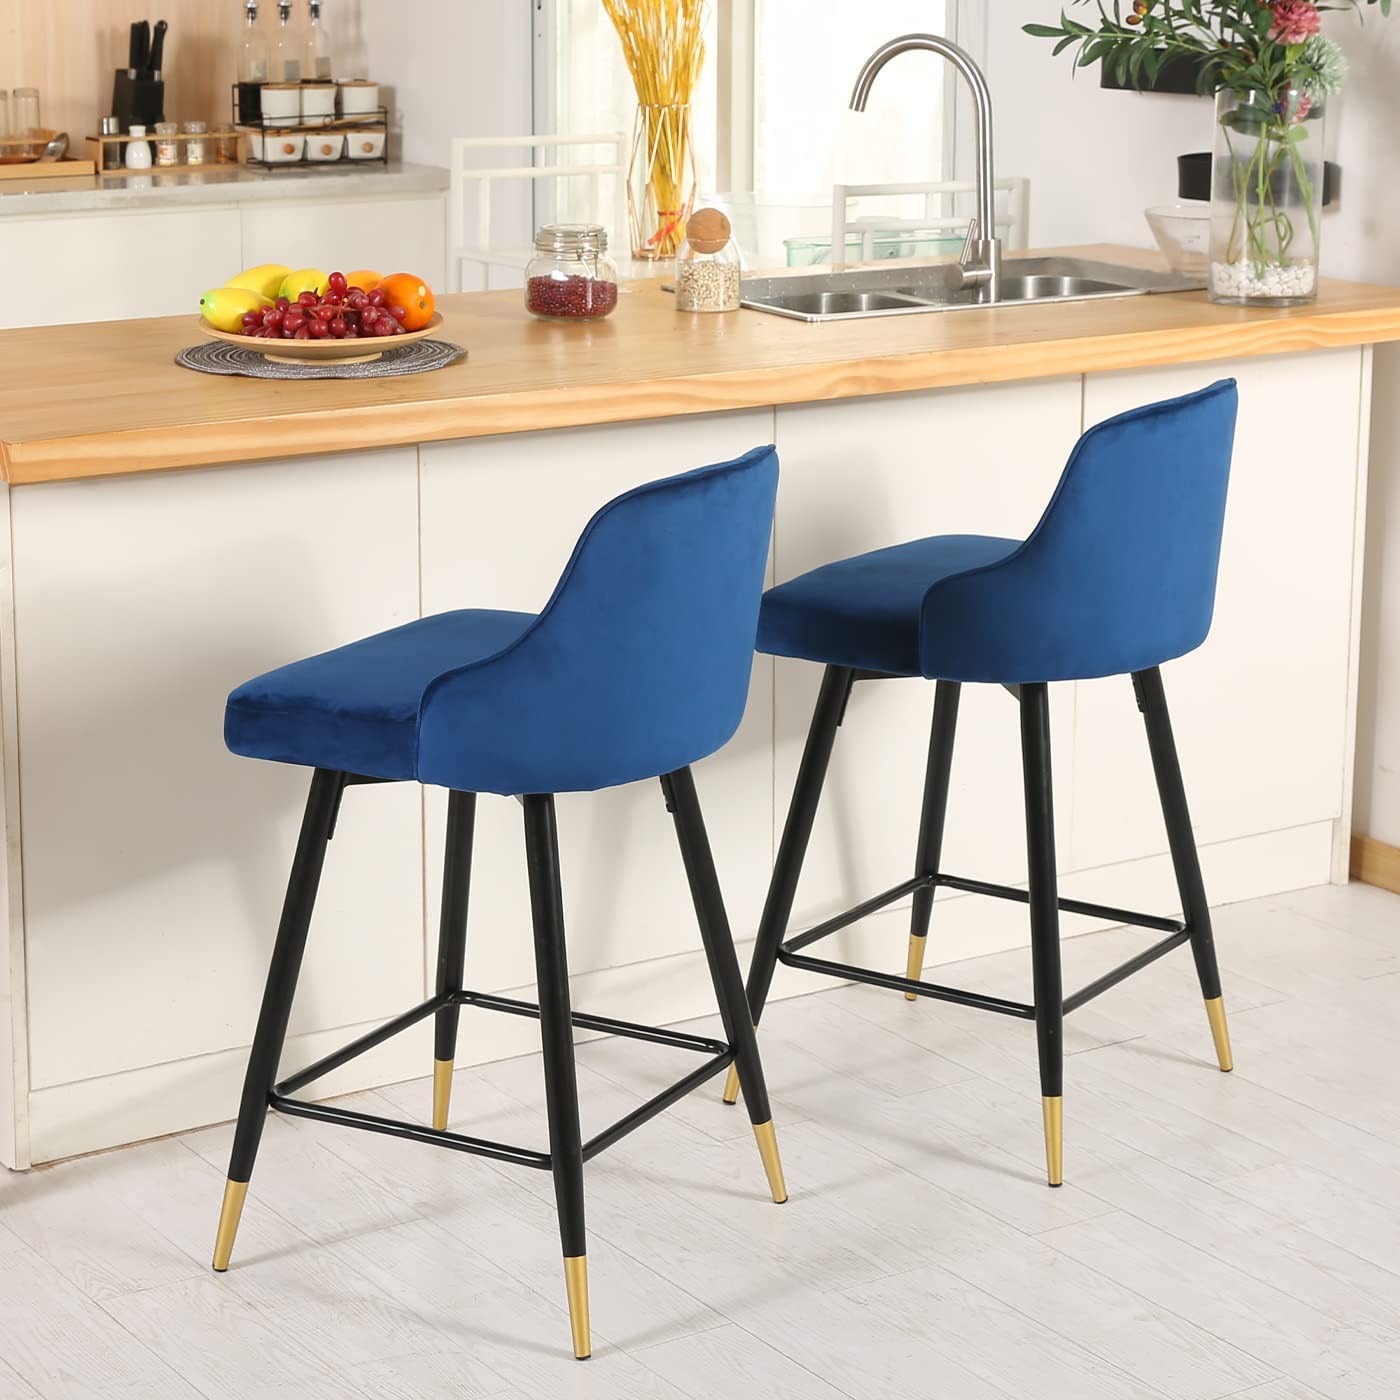 Sicotas Leather Counter Velvet Bar Stool For Club and Kitchen